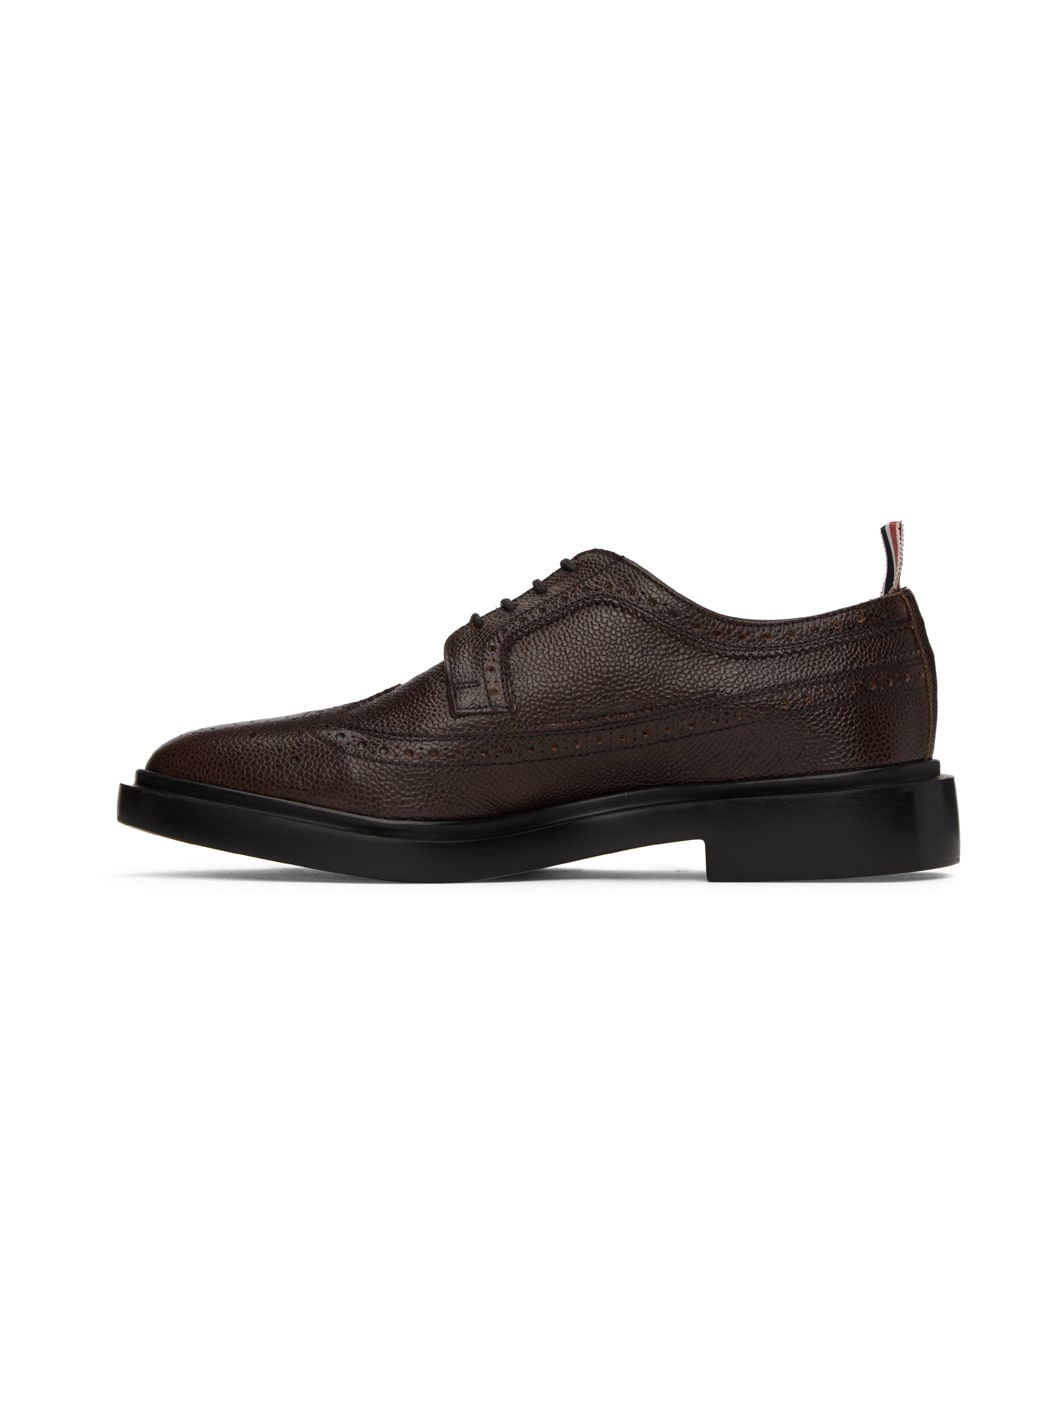 Brown Longwing Oxfords - 3